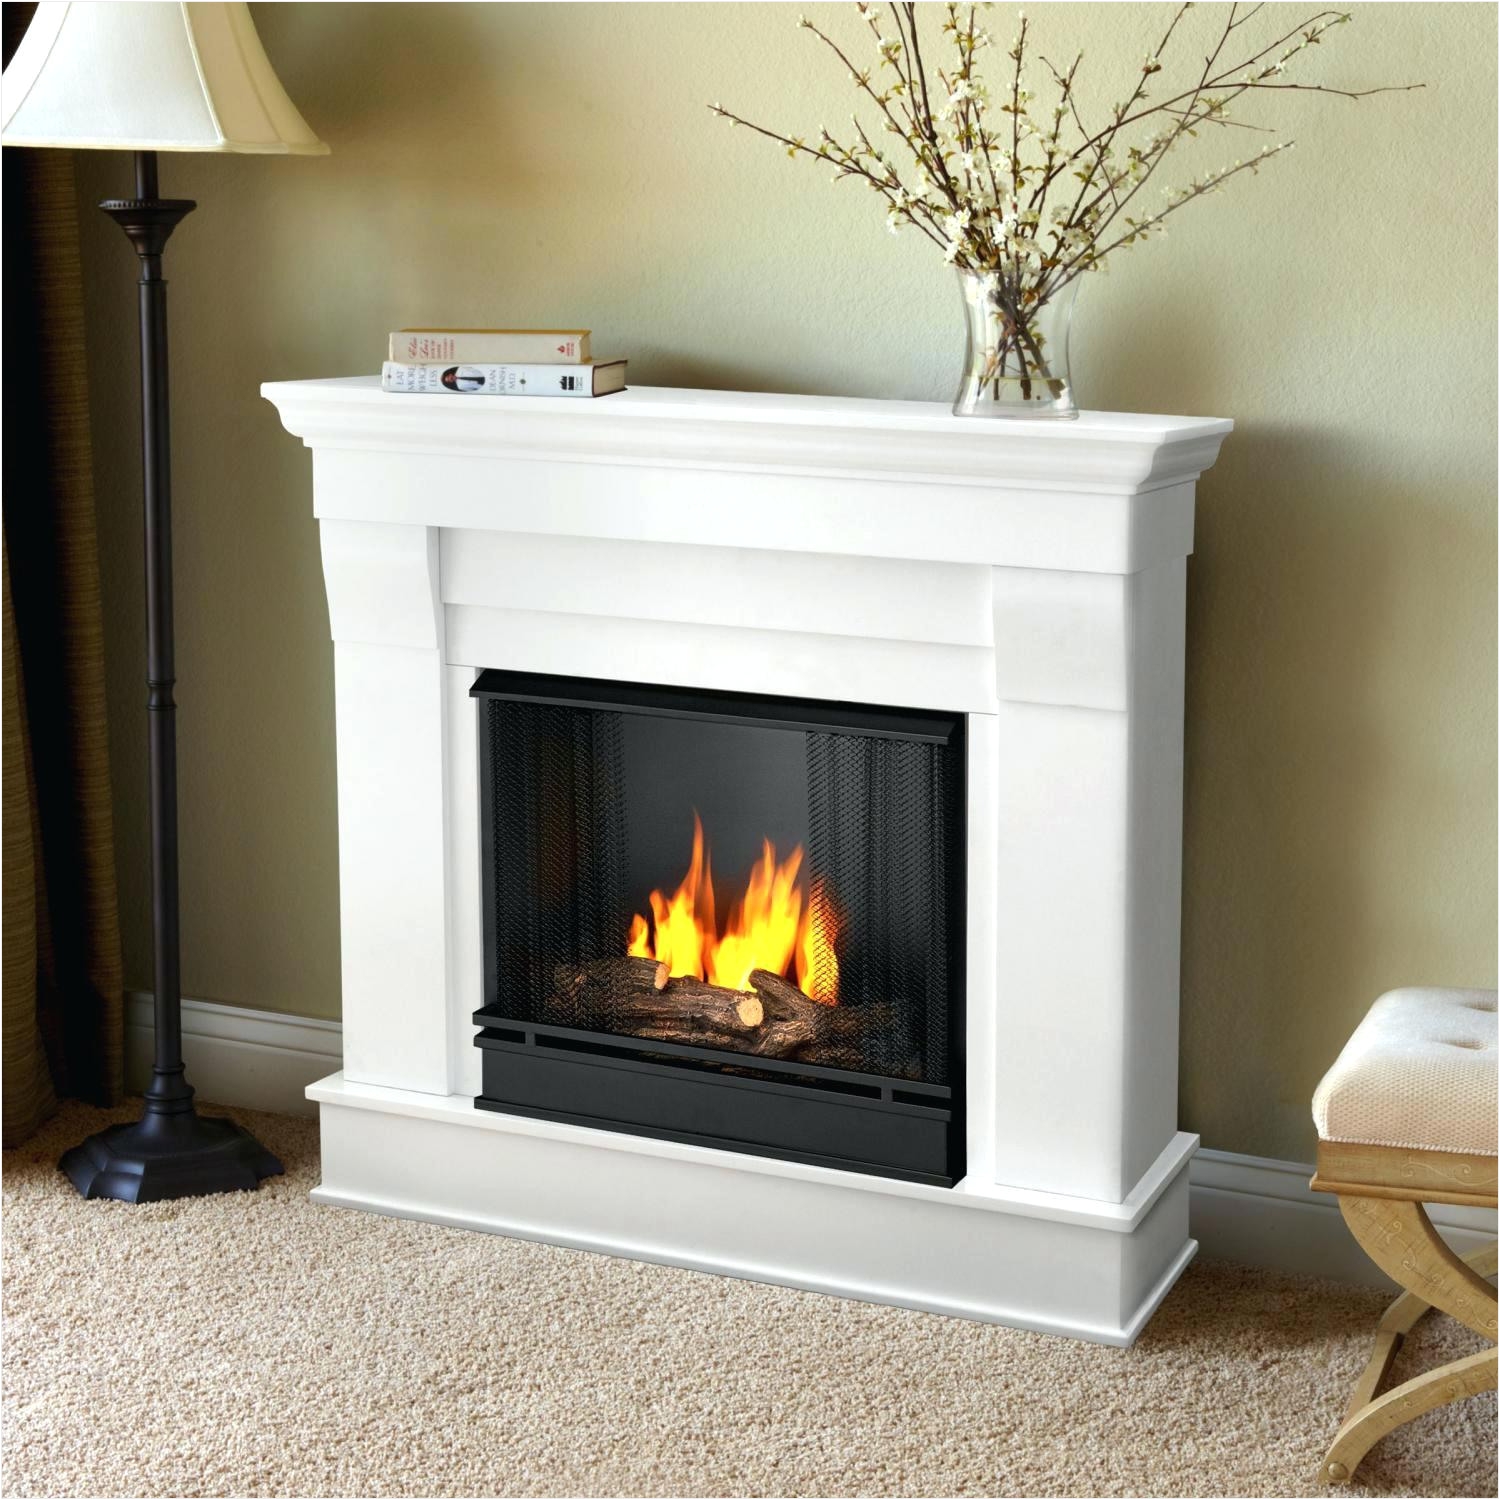 lowes ventless gas fireplace maidanchronicles of 19 valor gas fireplace inserts reviews h2o